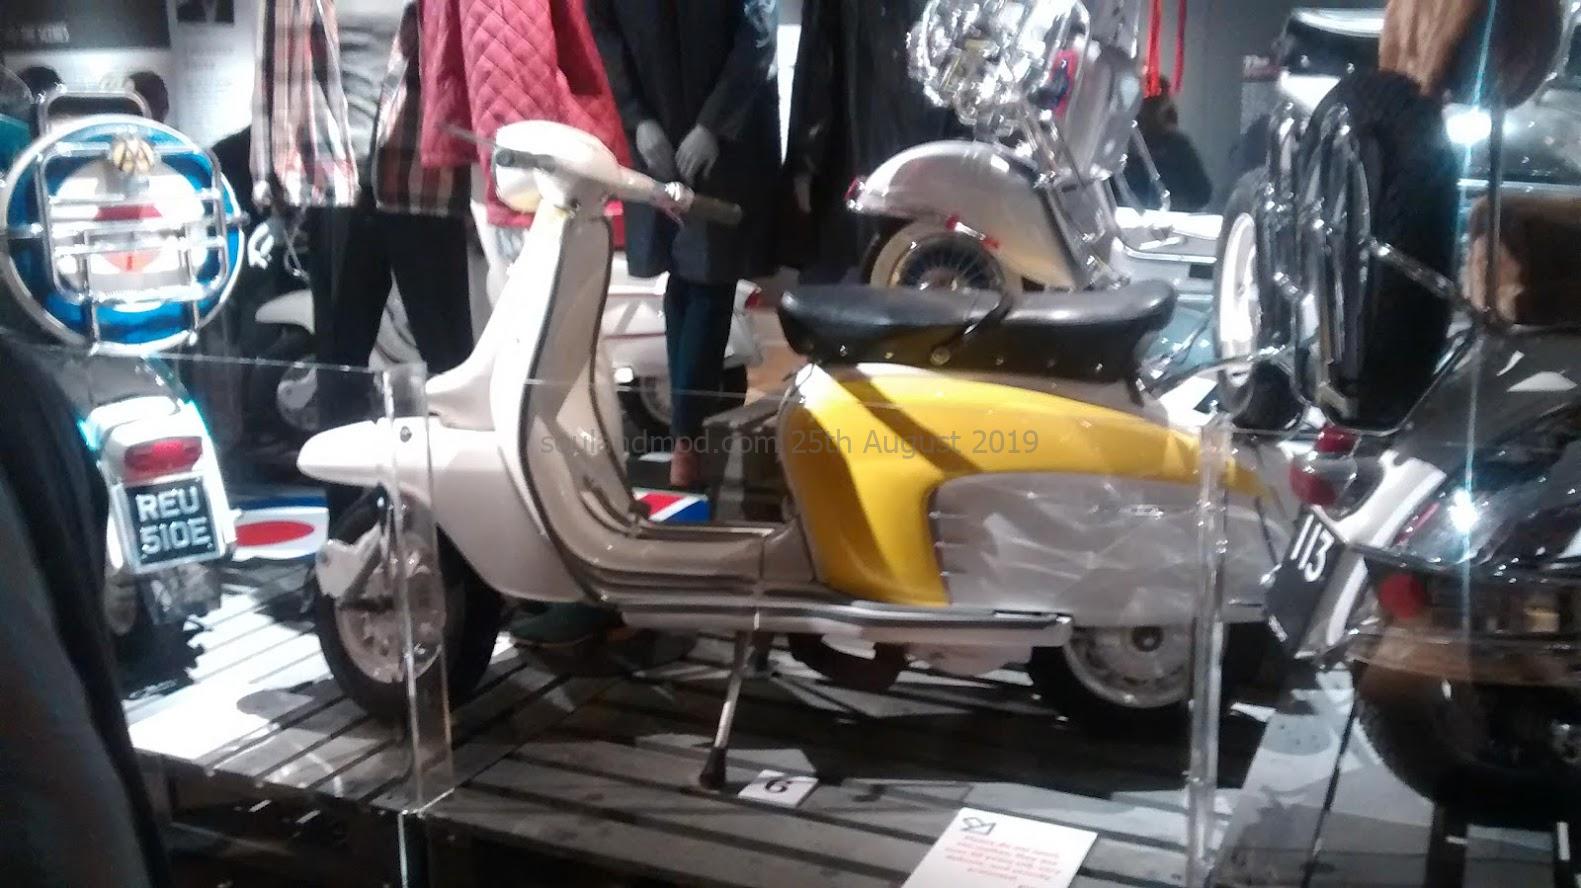 Mods Shaping A Generation Exhibition Leicester - Scooter Exhibits - Lambrettas